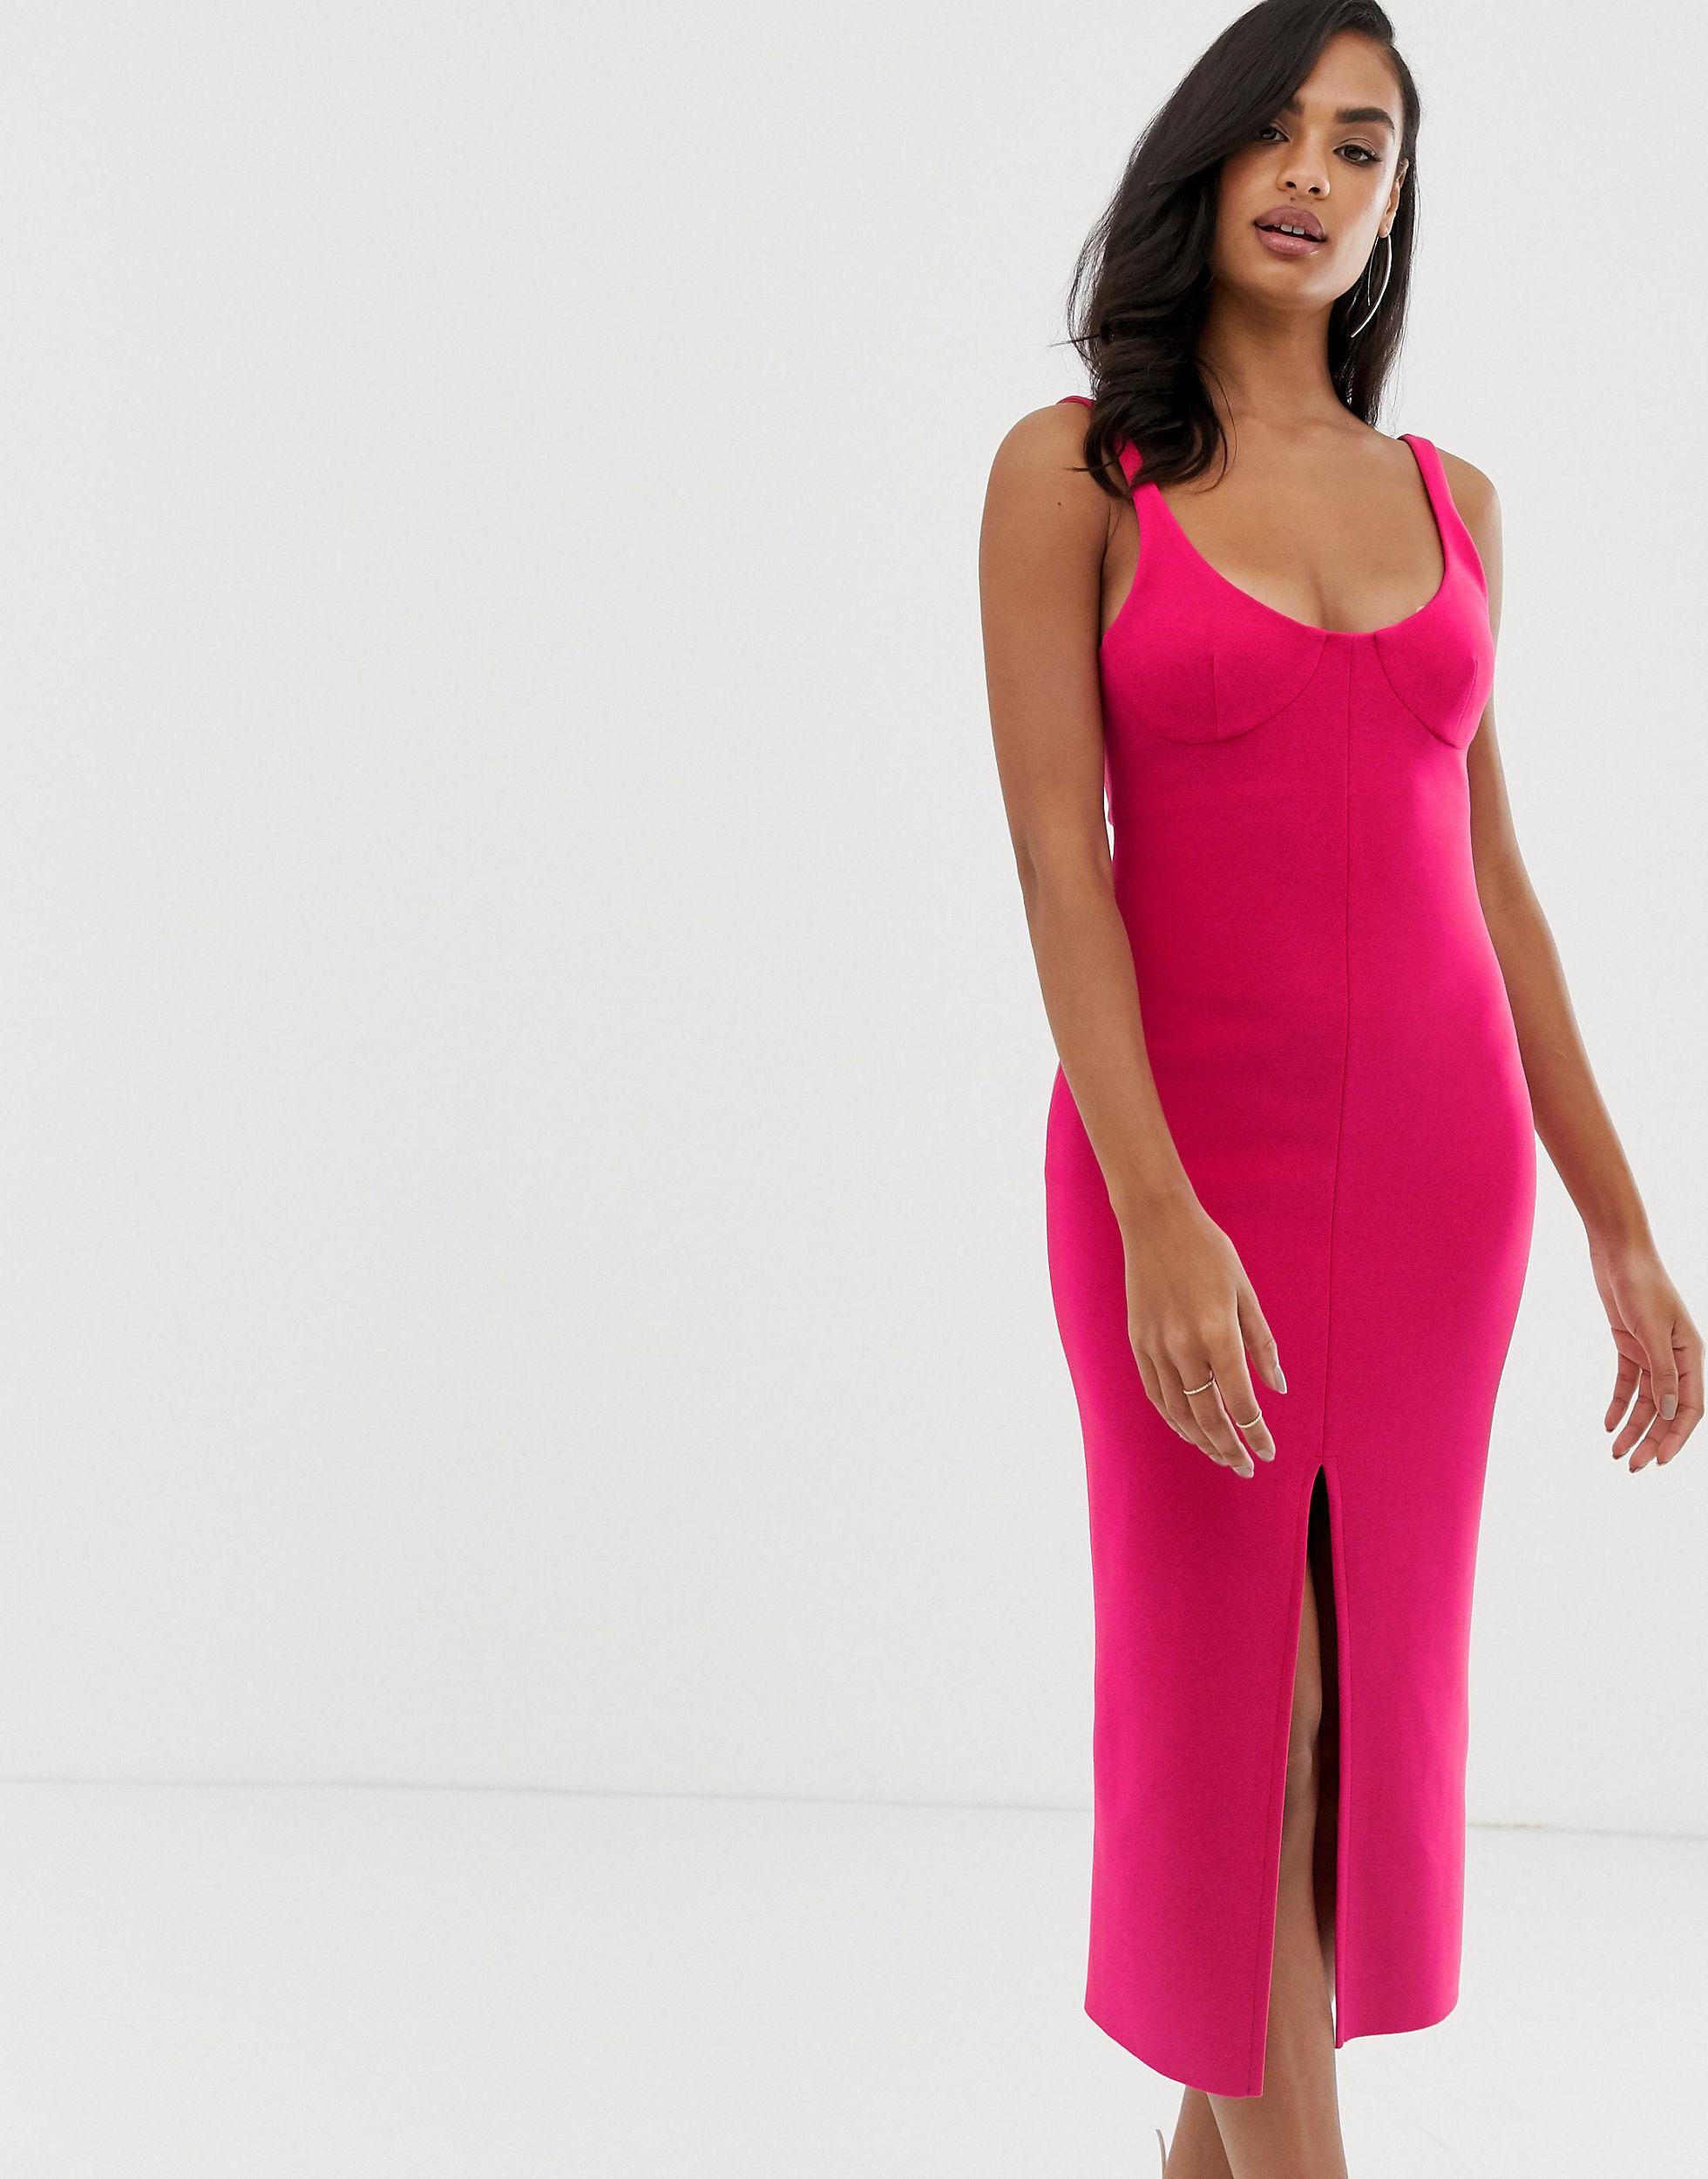 Synthetic Amelie Cup Midi Dress in Pink ...